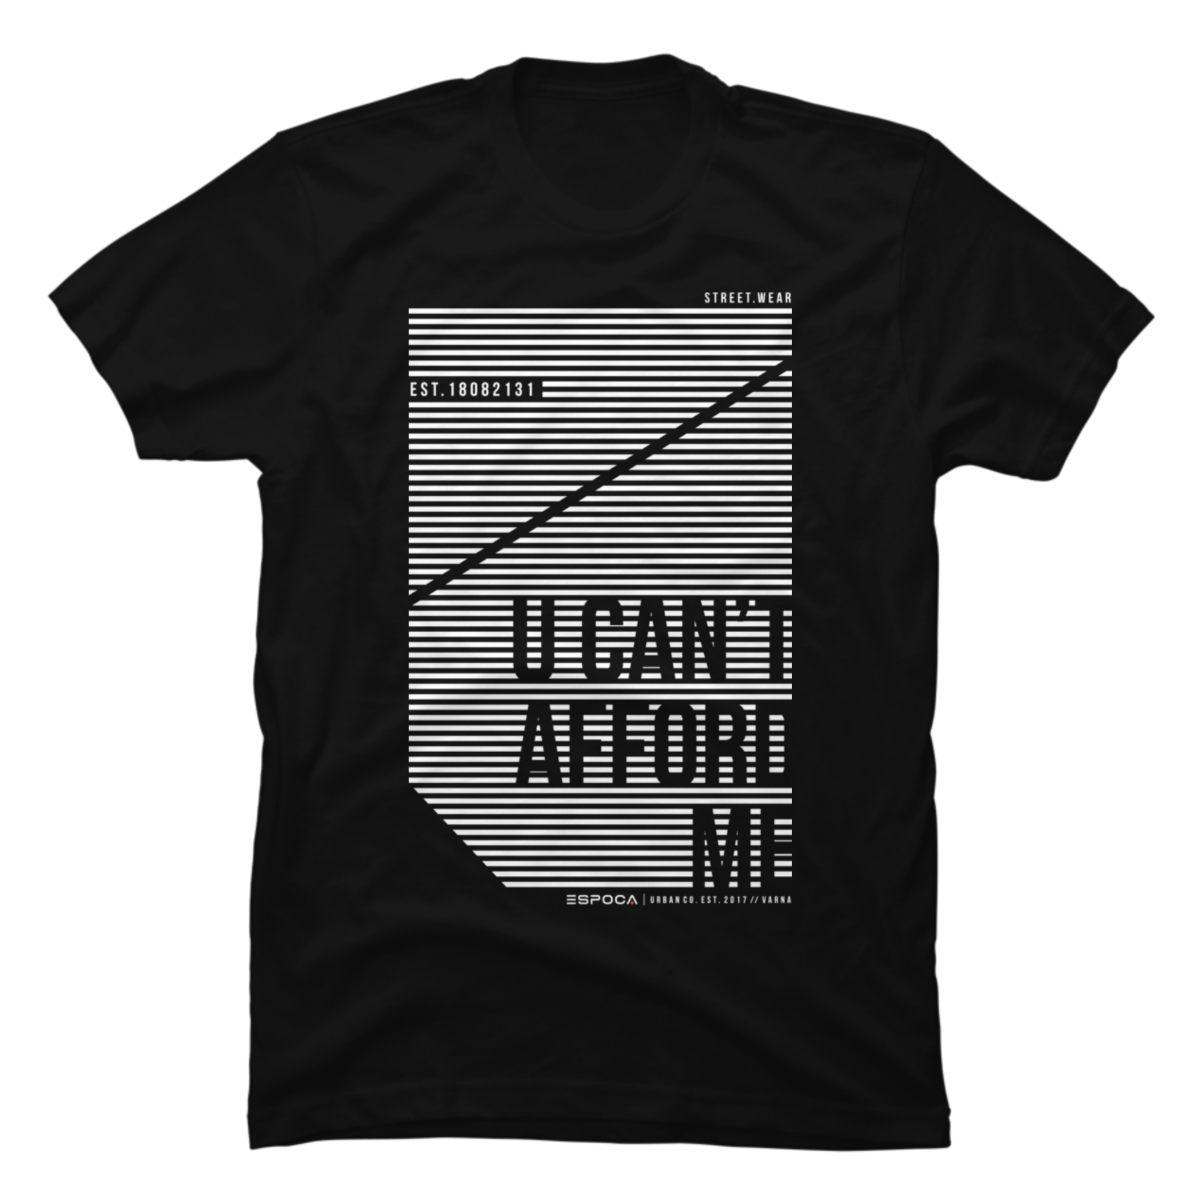 you can t afford me shirt